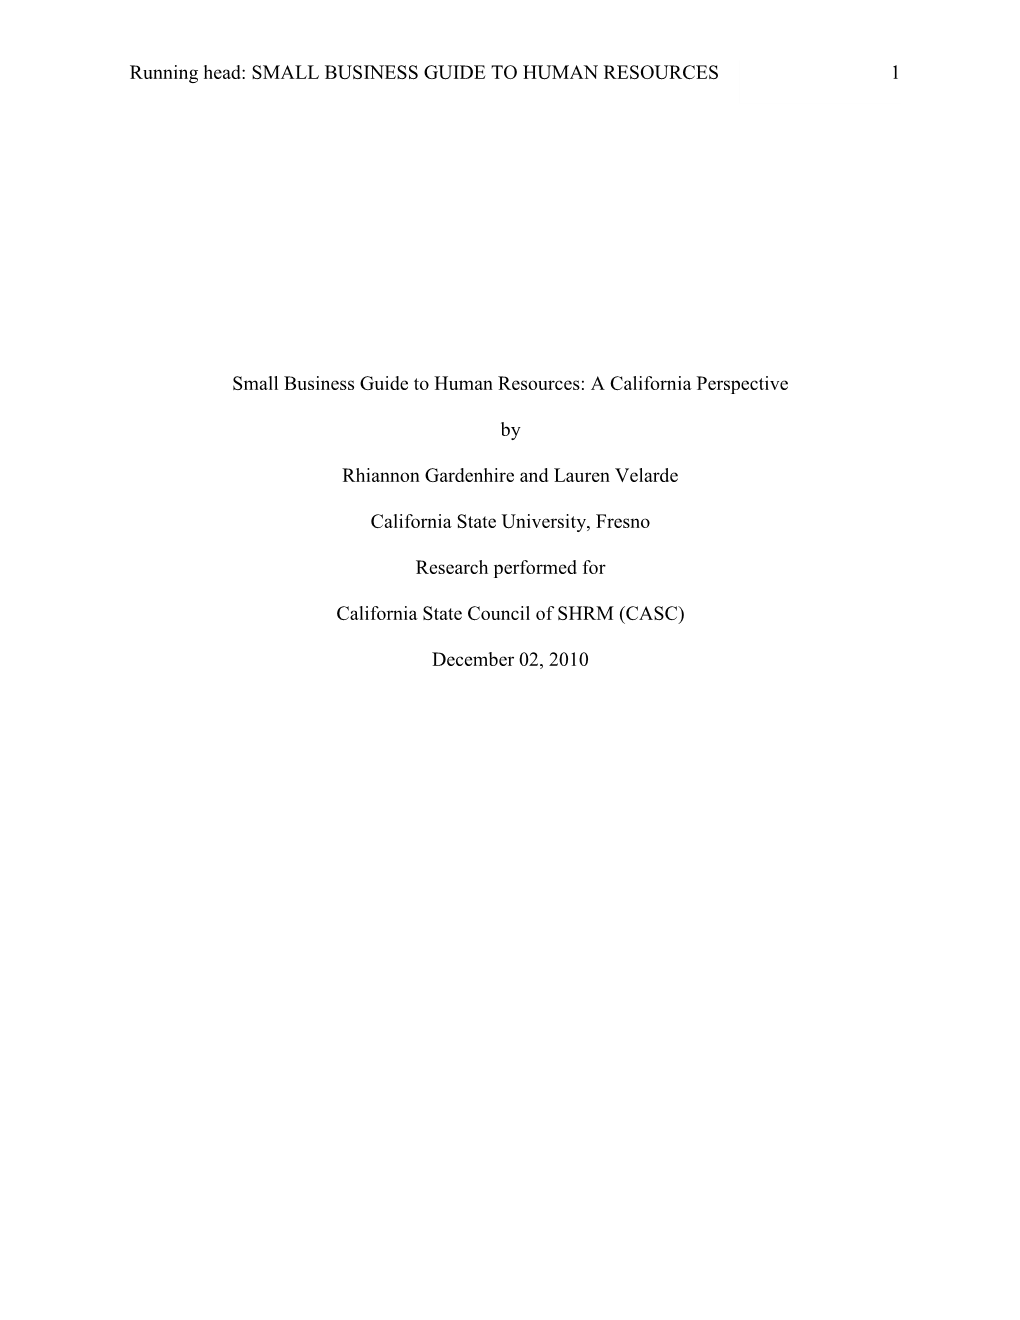 Small Business Guide to Human Resources: a California Perspective